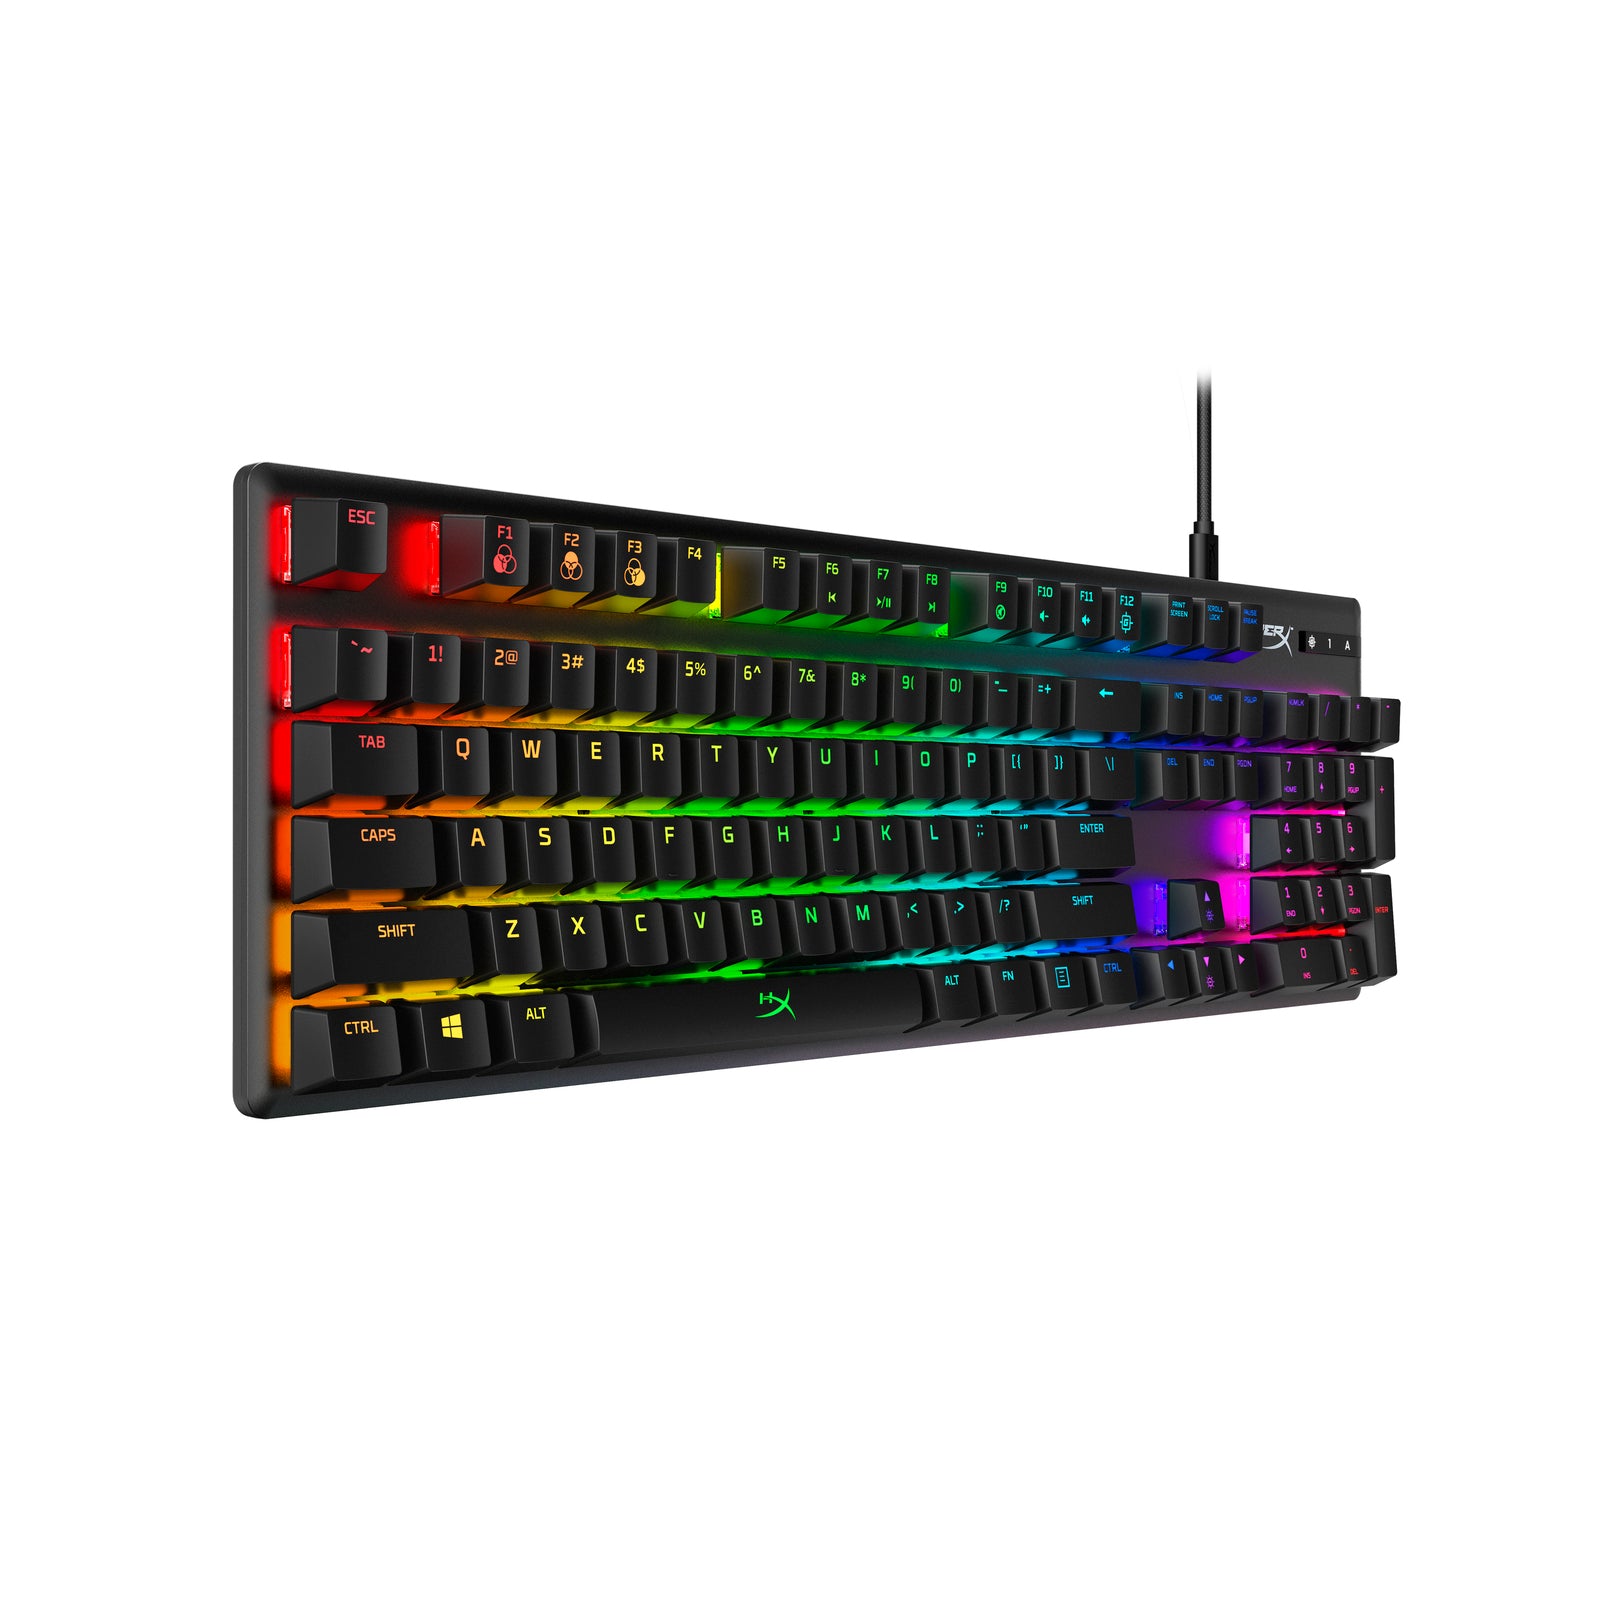 HyperX Alloy Origins Gaming Mechanical Keyboard showing the left side view featuring customizable RGB lighting